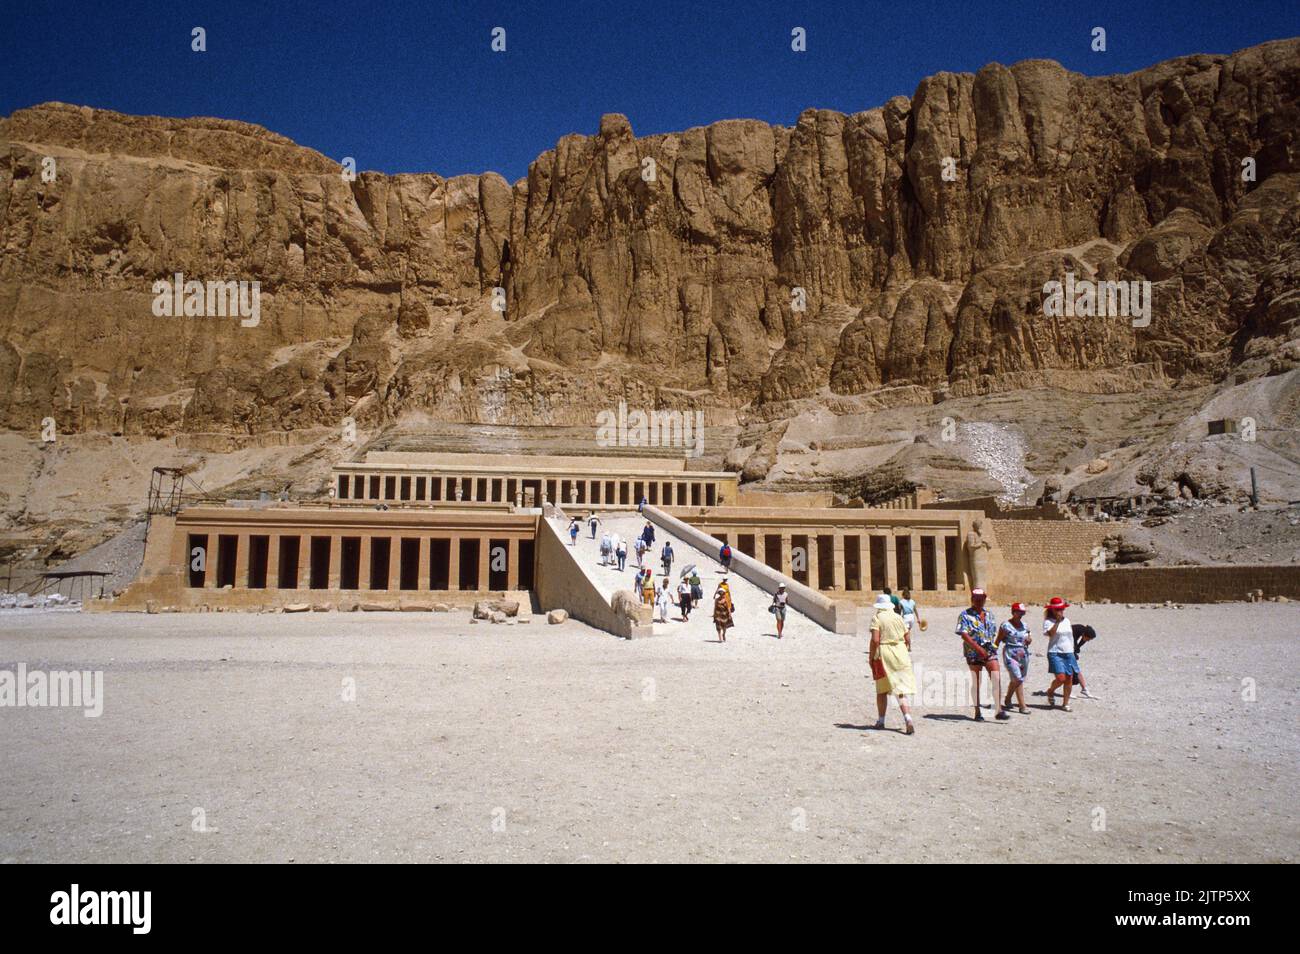 The Hatshepsut Mortuary Temple in the Valley of the Queens in 1986, Luxor, Egypt Stock Photo